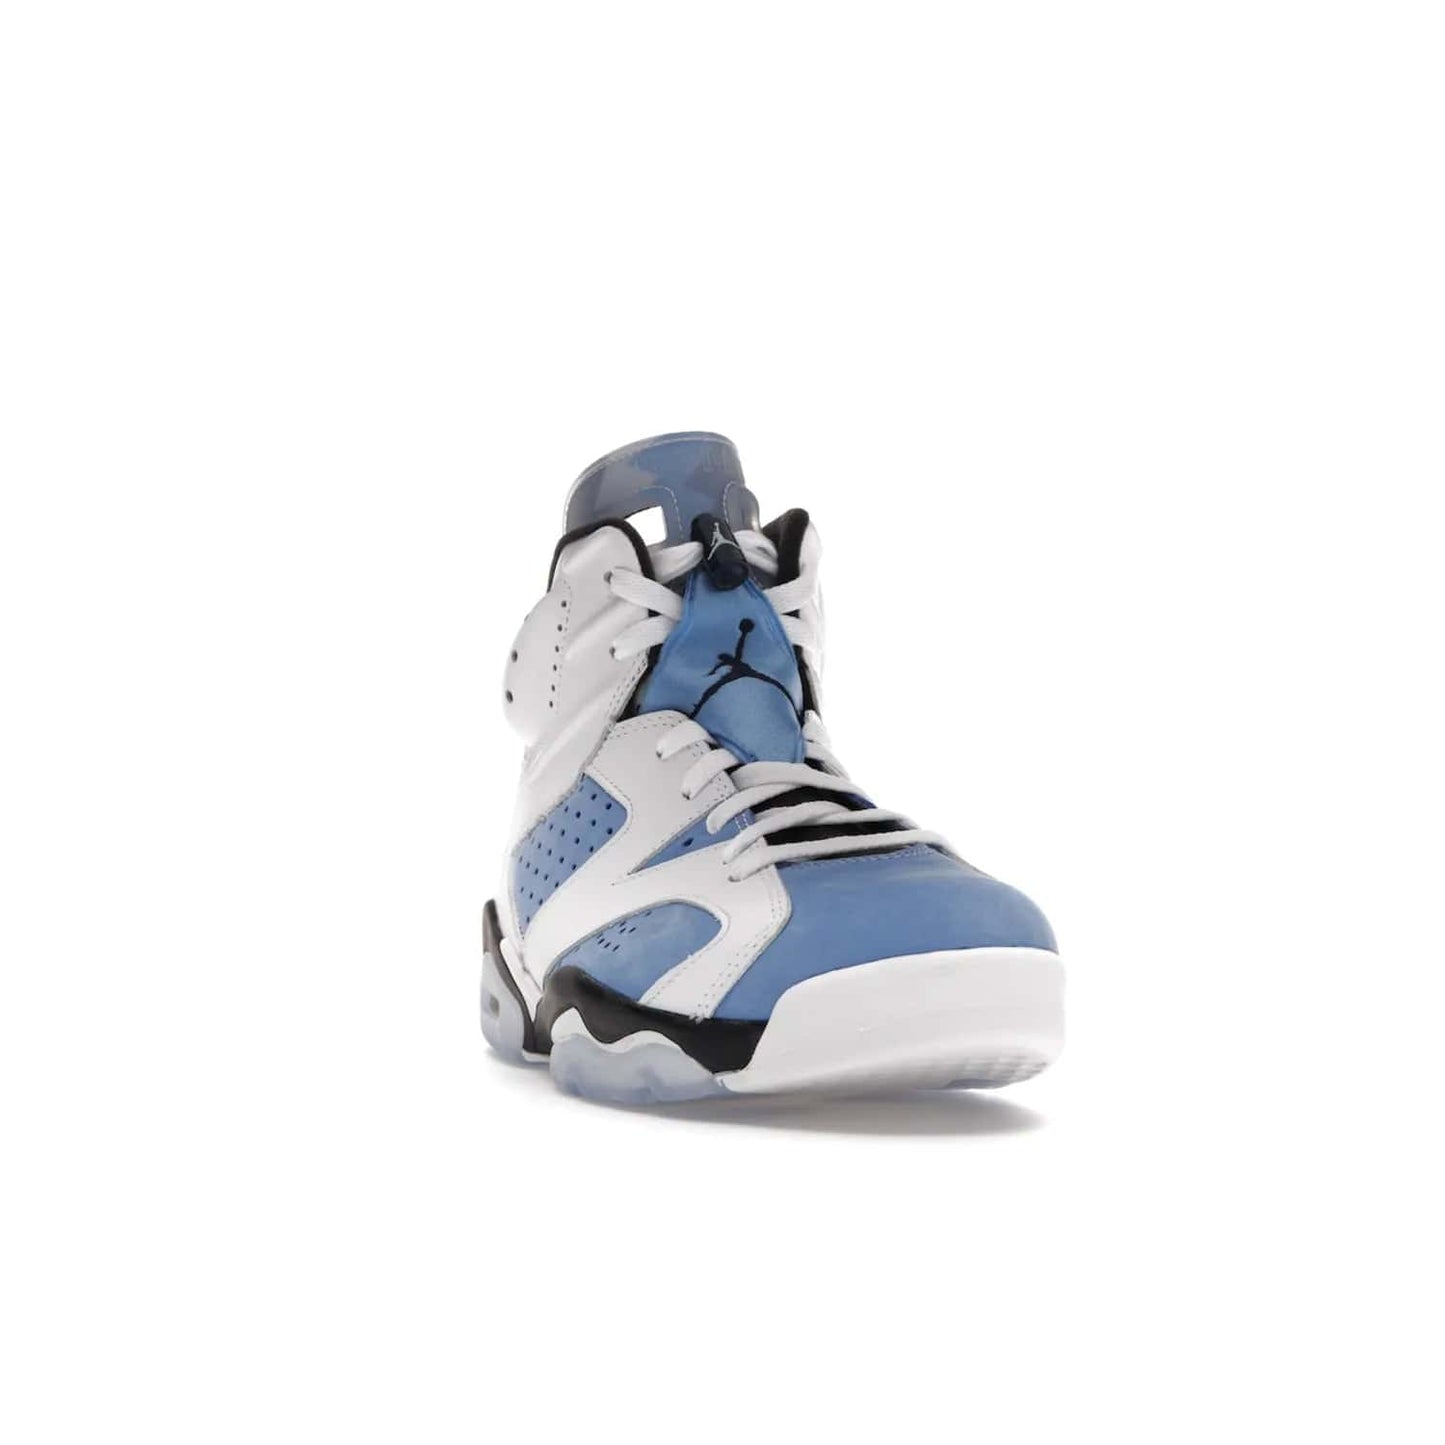 Jordan 6 Retro UNC White - Image 8 - Only at www.BallersClubKickz.com - Air Jordan 6 Retro UNC White with classic UNC colors brings nostalgia and style to a legendary silhouette. Celebrate MJ's alma mater with navy blue accents, icy semi-translucent sole and Jordan Team patch. Out March 2022 for the Sneaker Enthusiast.